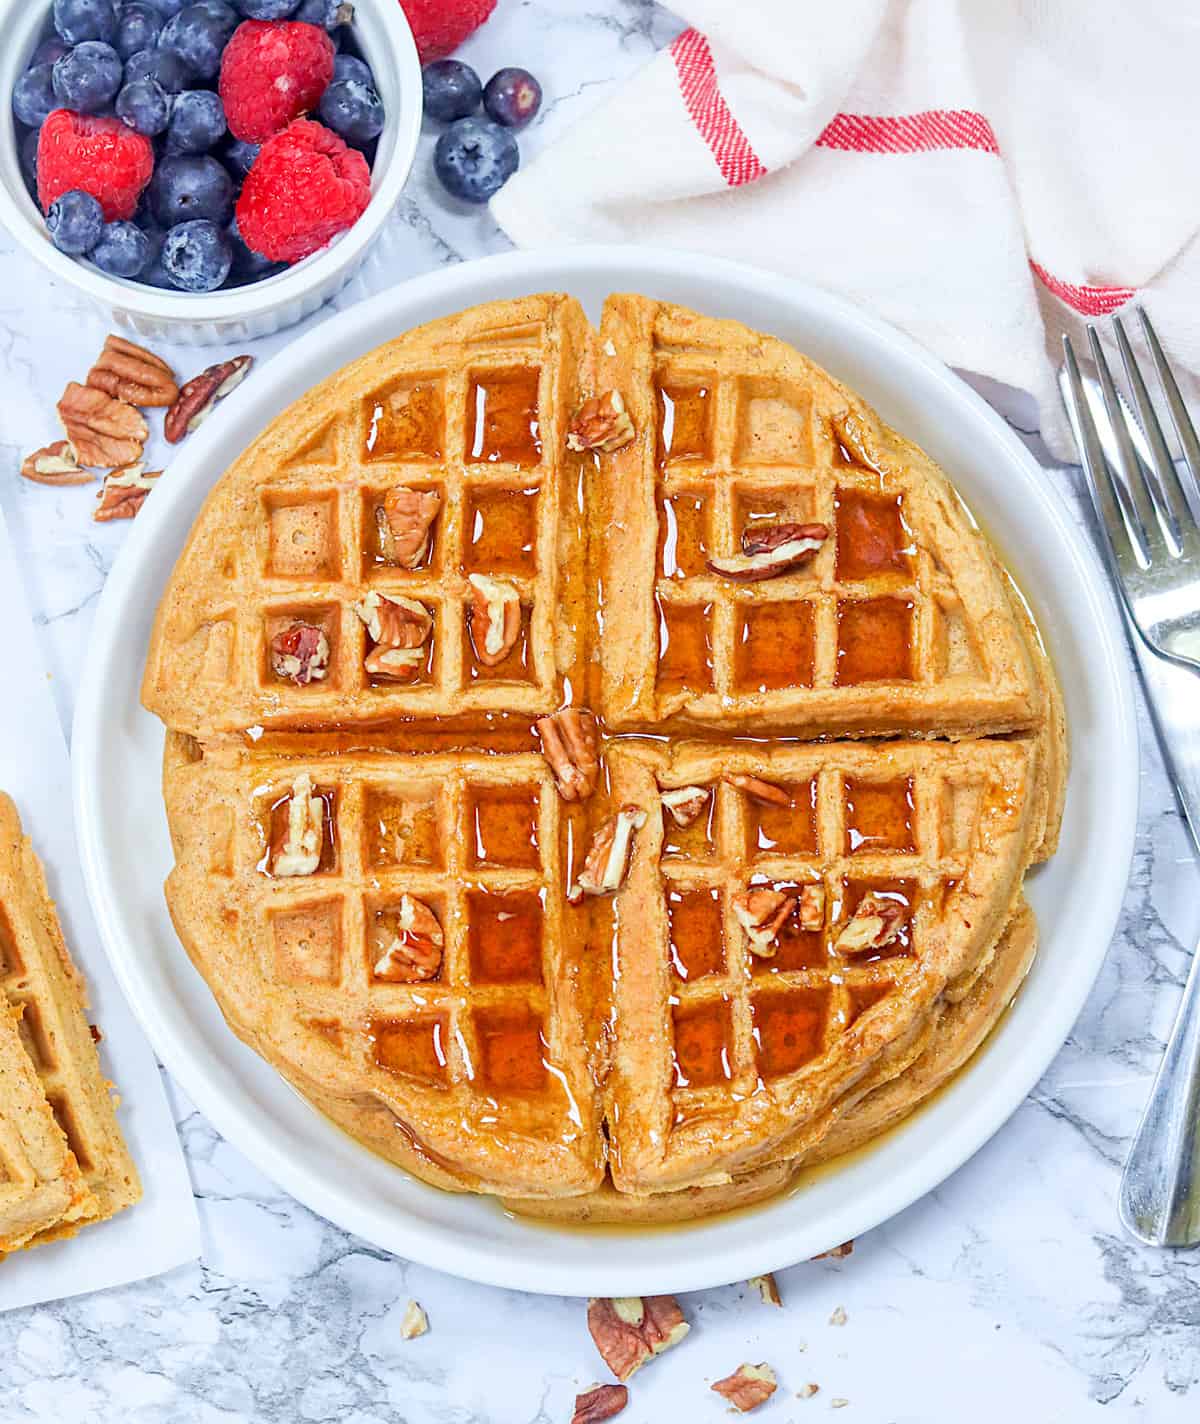 Serving up fresh, homemade sweet potato waffles with fresh berries and maple syrup